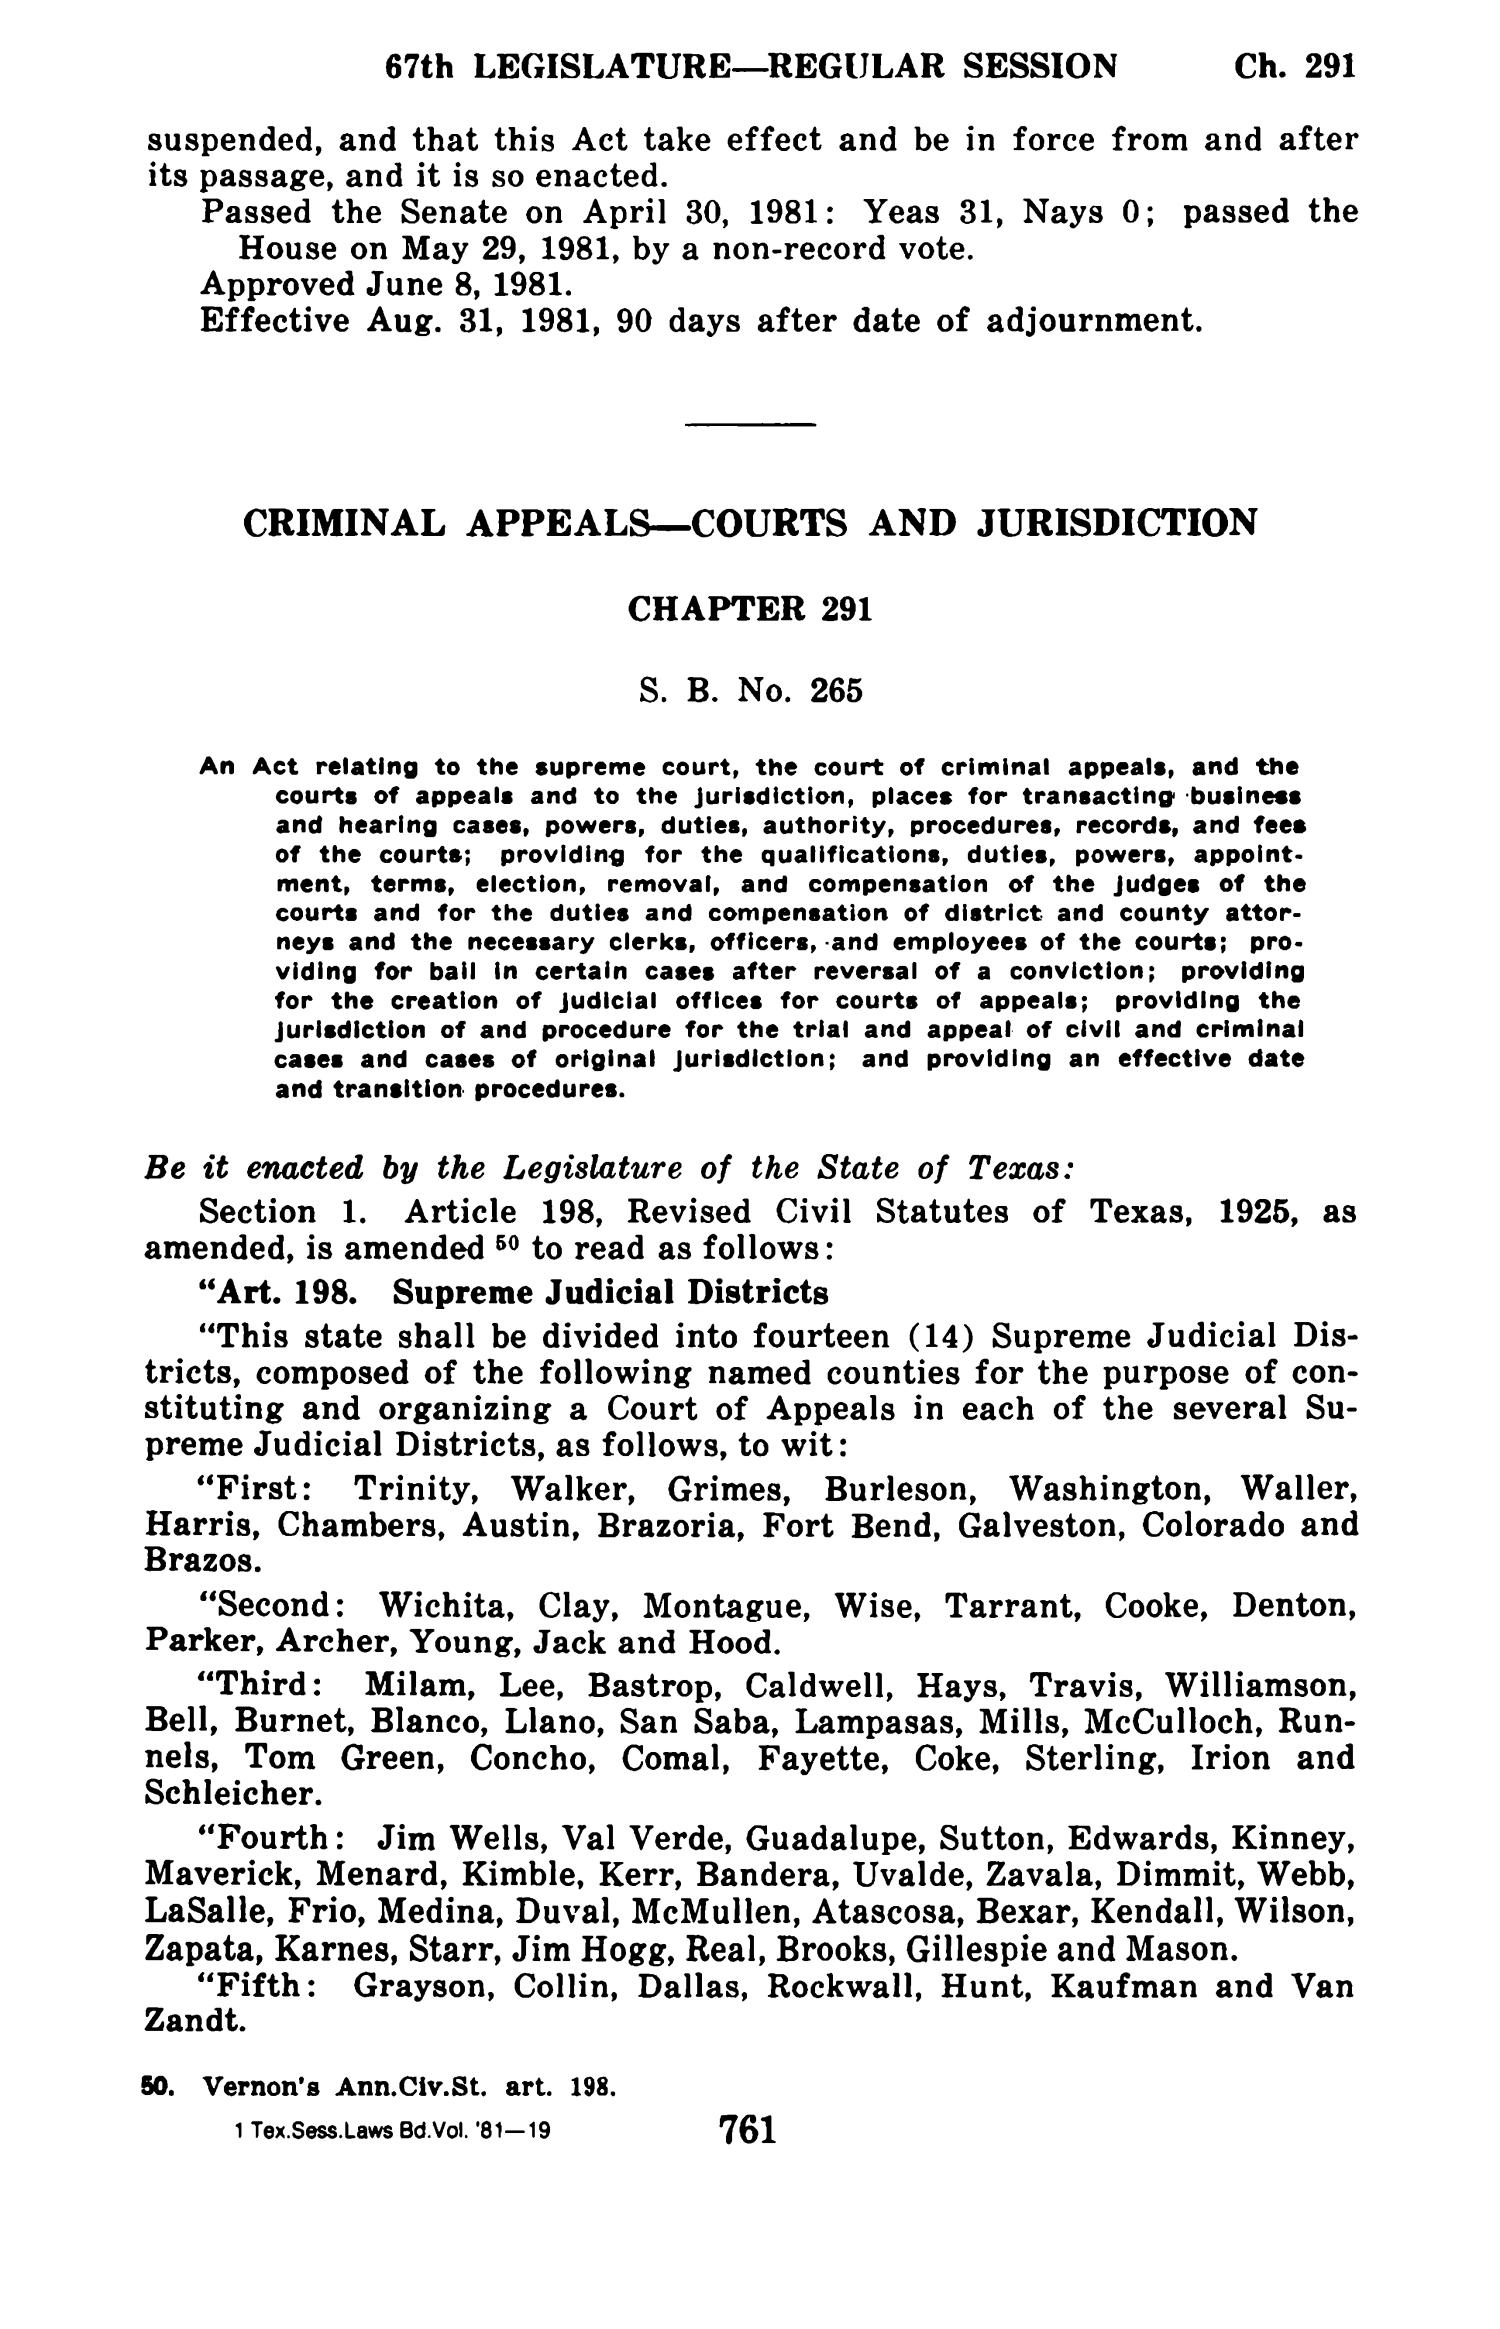 General and Special Laws of The State of Texas Passed By The Regular Session of the Sixty-Seventh Legislature, Volume 1
                                                
                                                    761
                                                